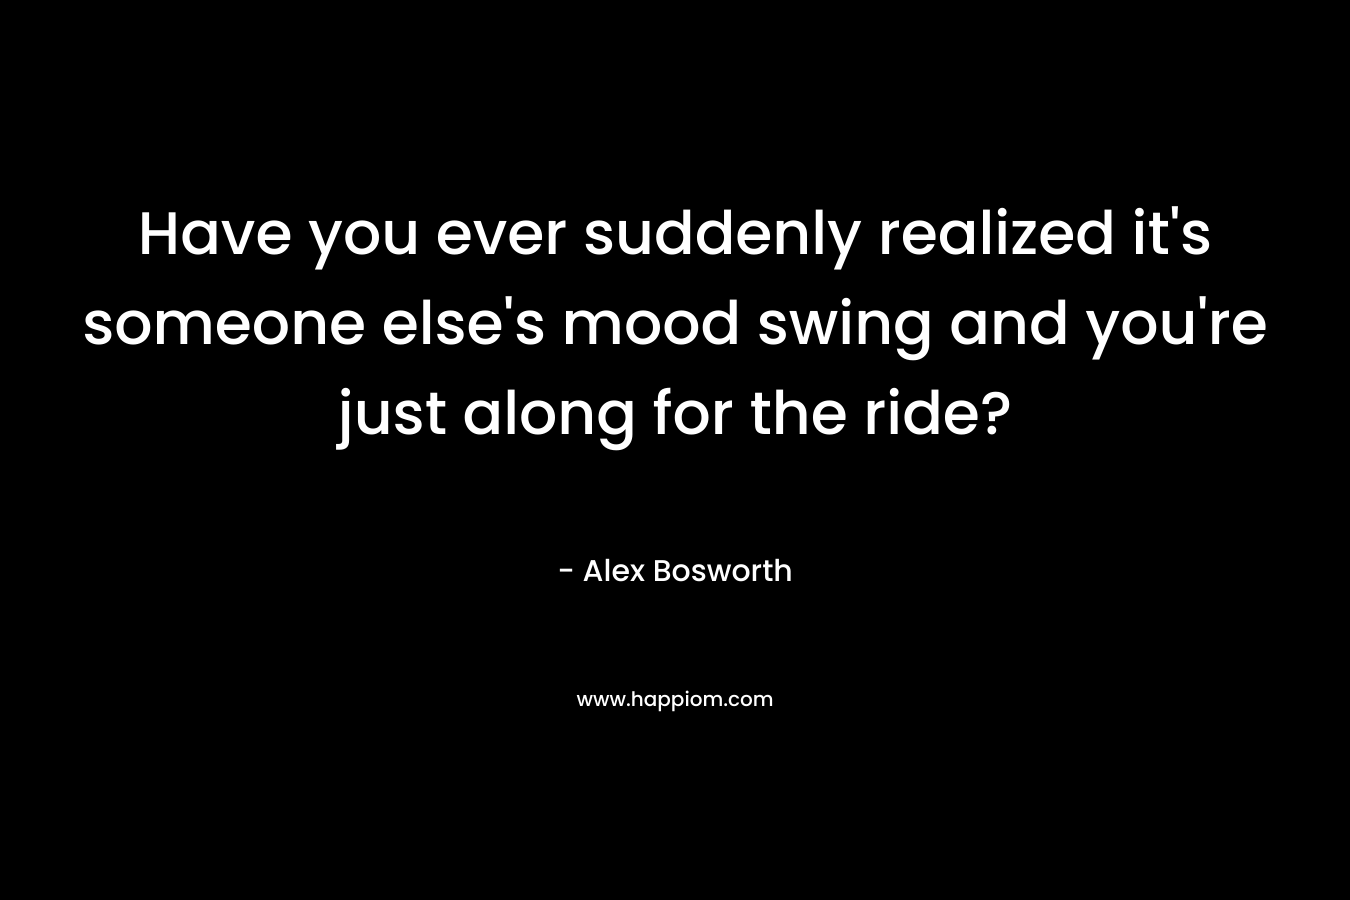 Have you ever suddenly realized it’s someone else’s mood swing and you’re just along for the ride? – Alex Bosworth